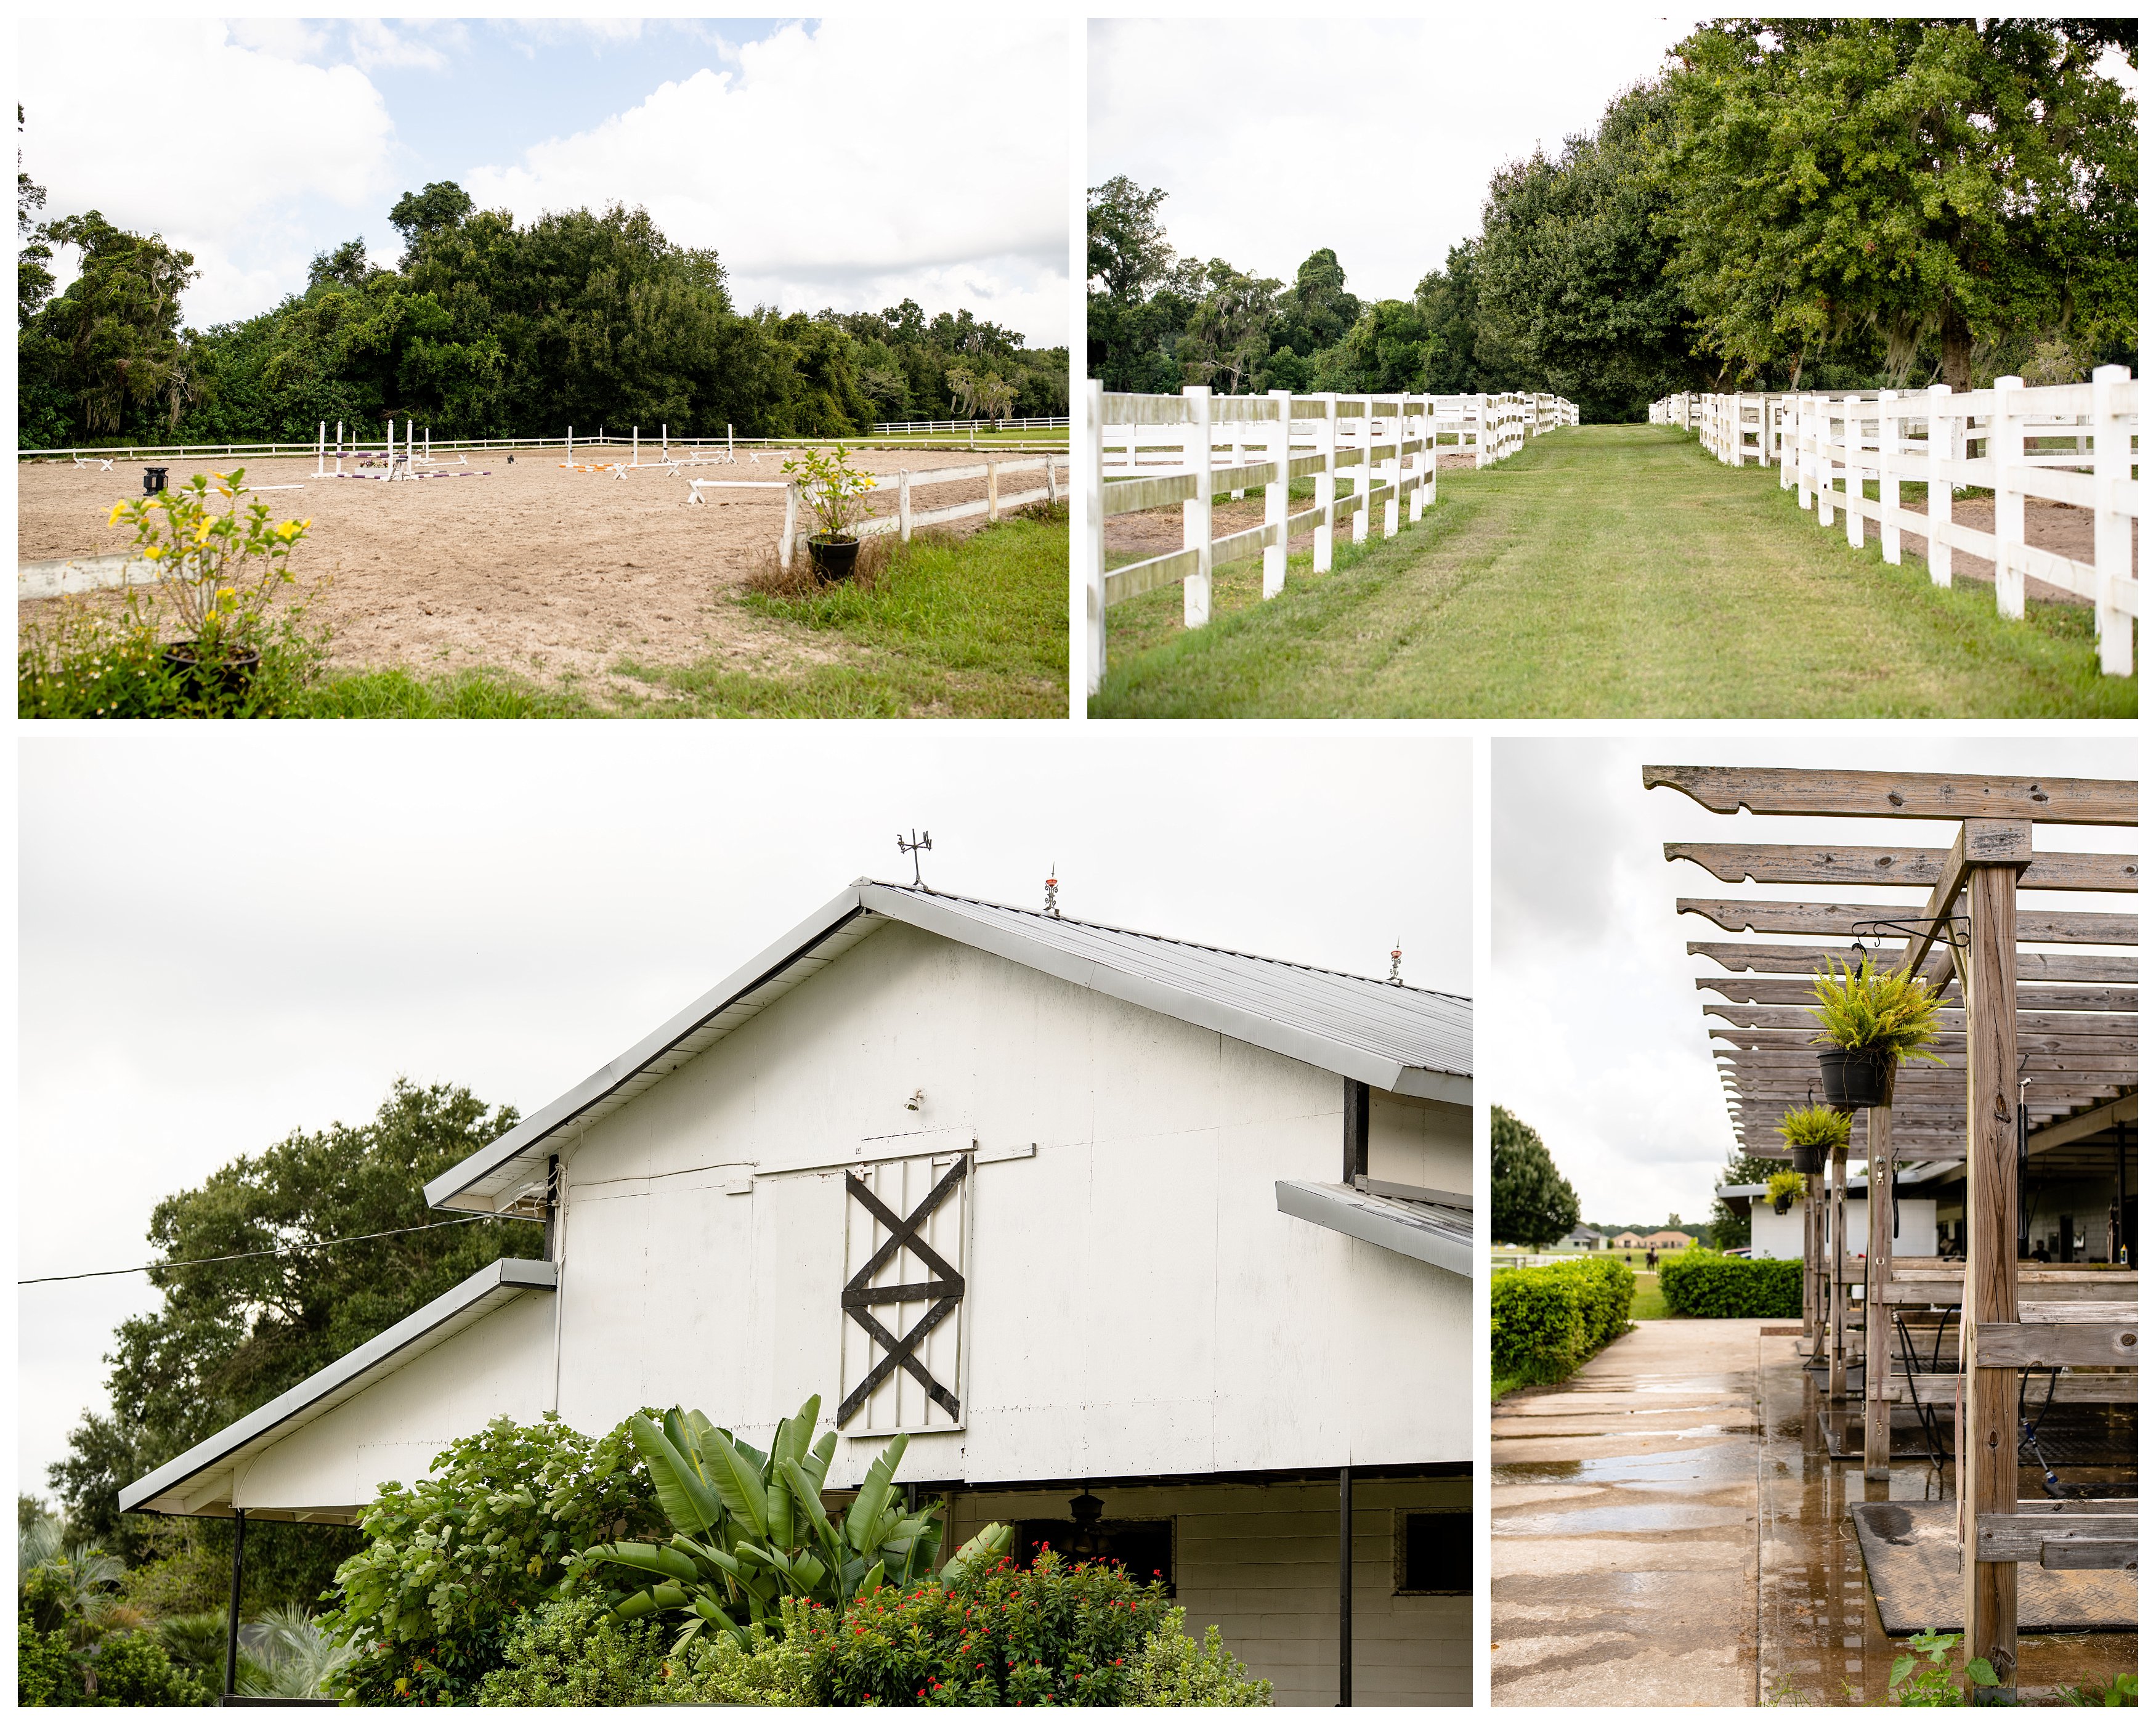 Professional barn in Ocala that offers boarding, training, sales, and showing.